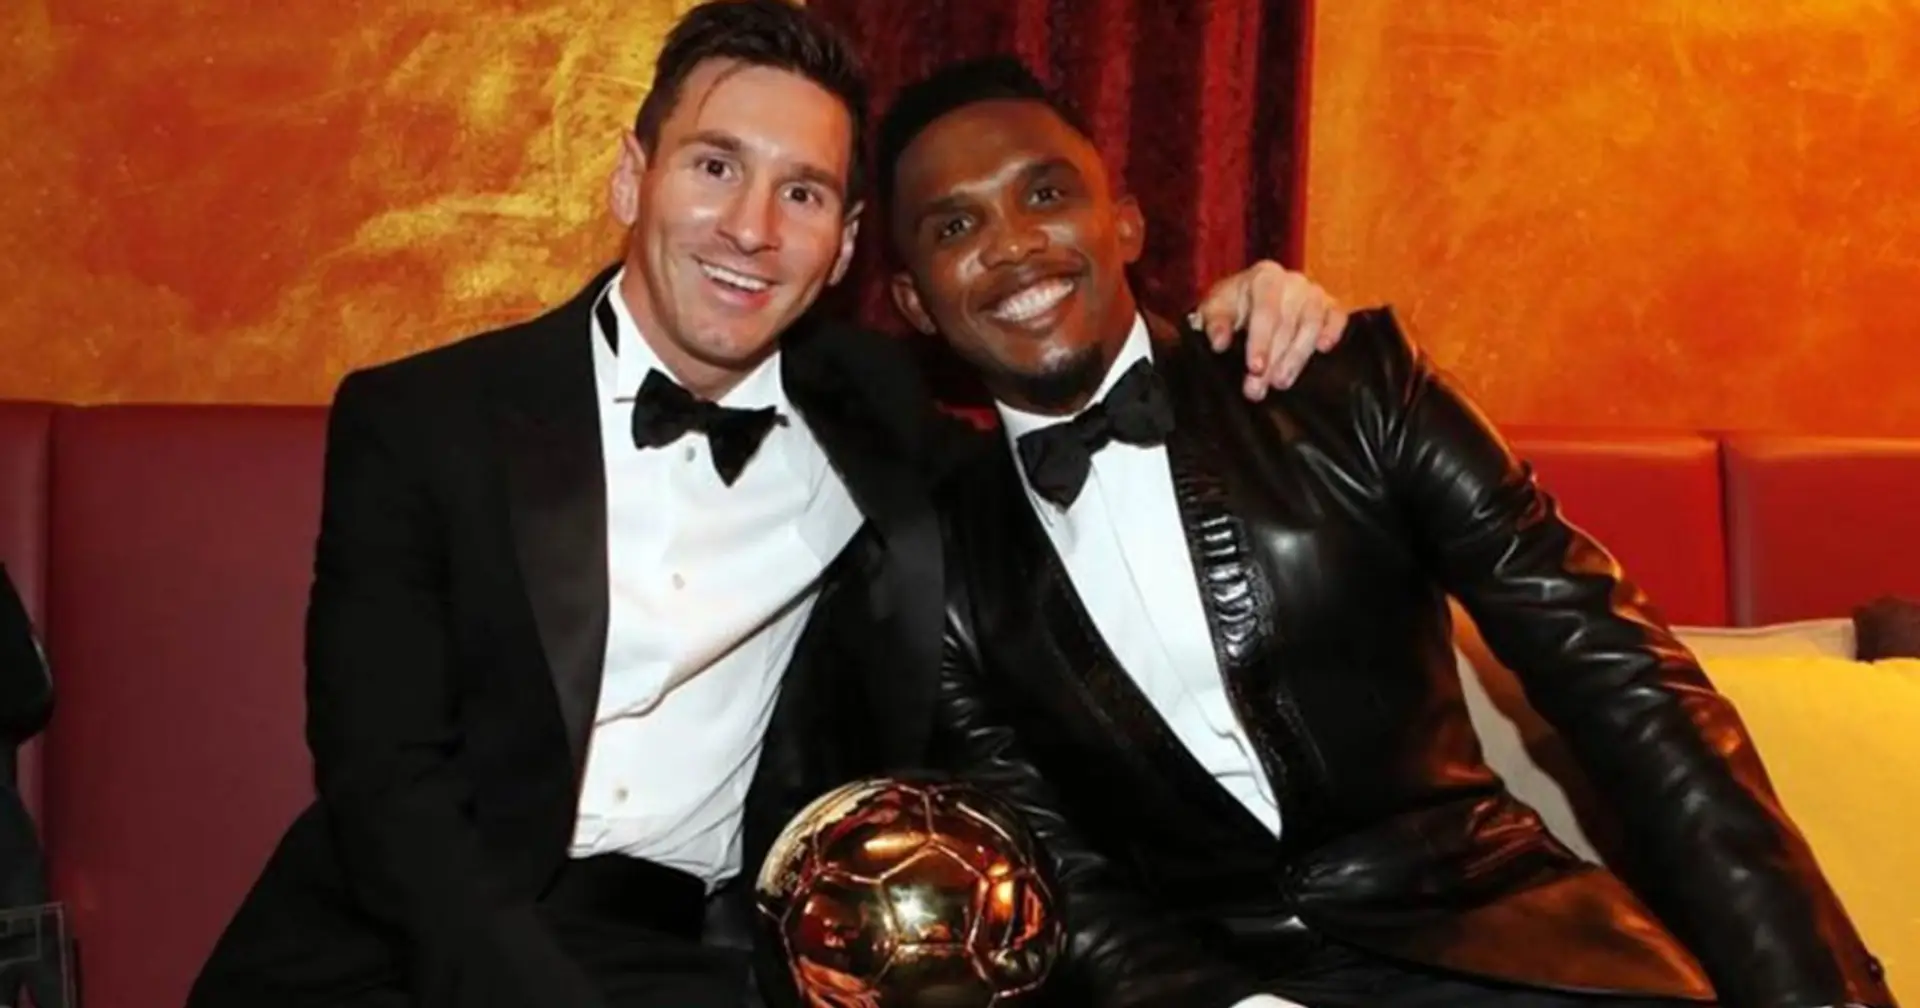 Eto'o will play charity match with Messi, Thuram and 5 more legends